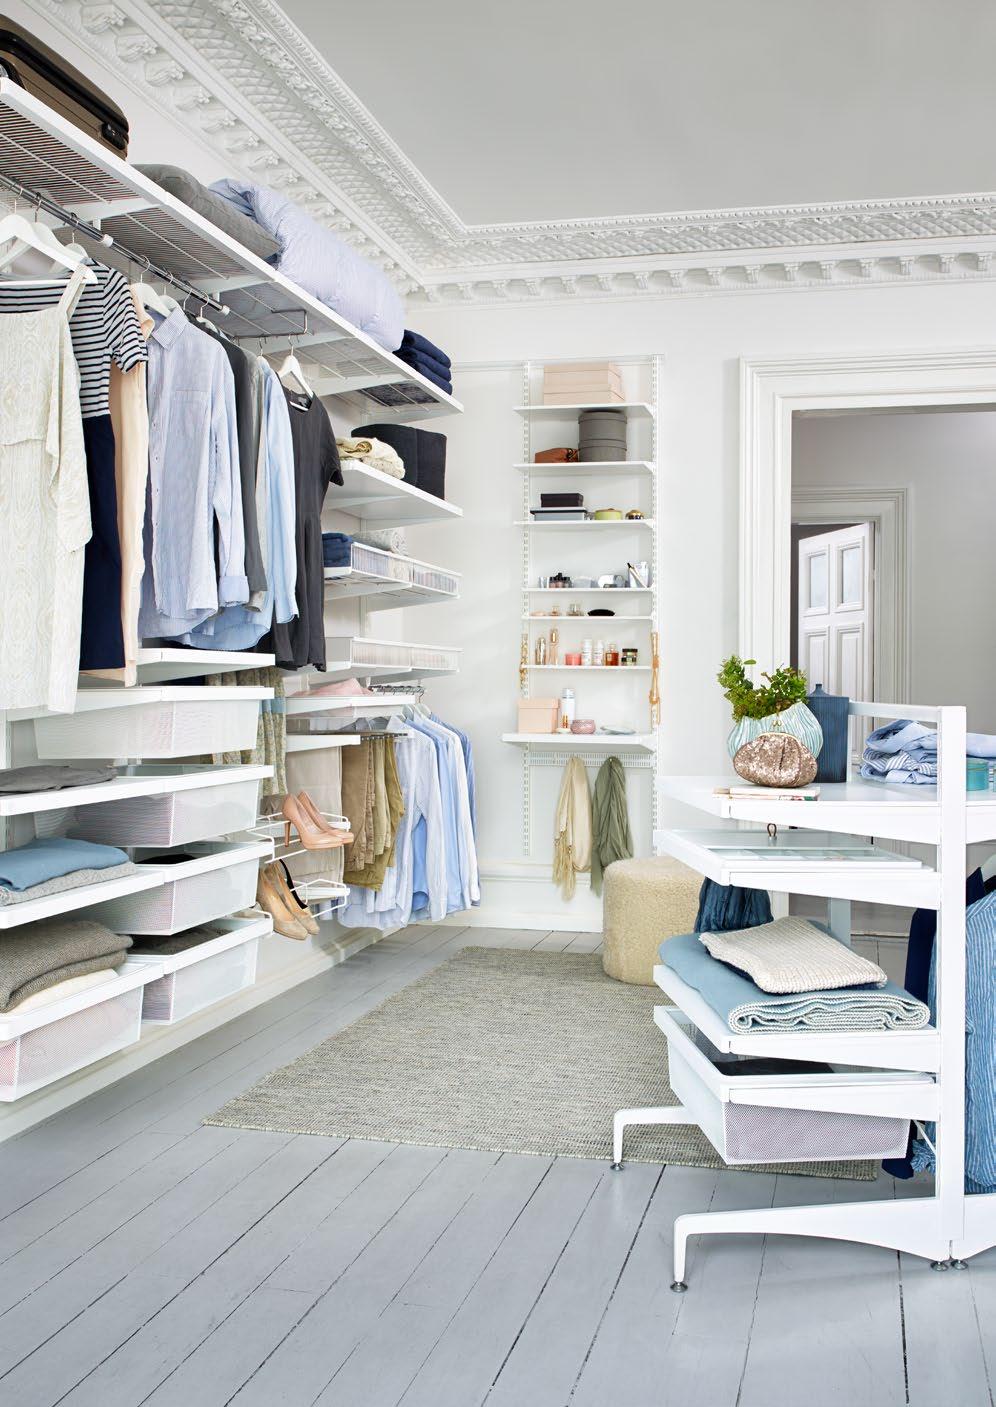 Use both walls and floor when creating your walk-in closet.